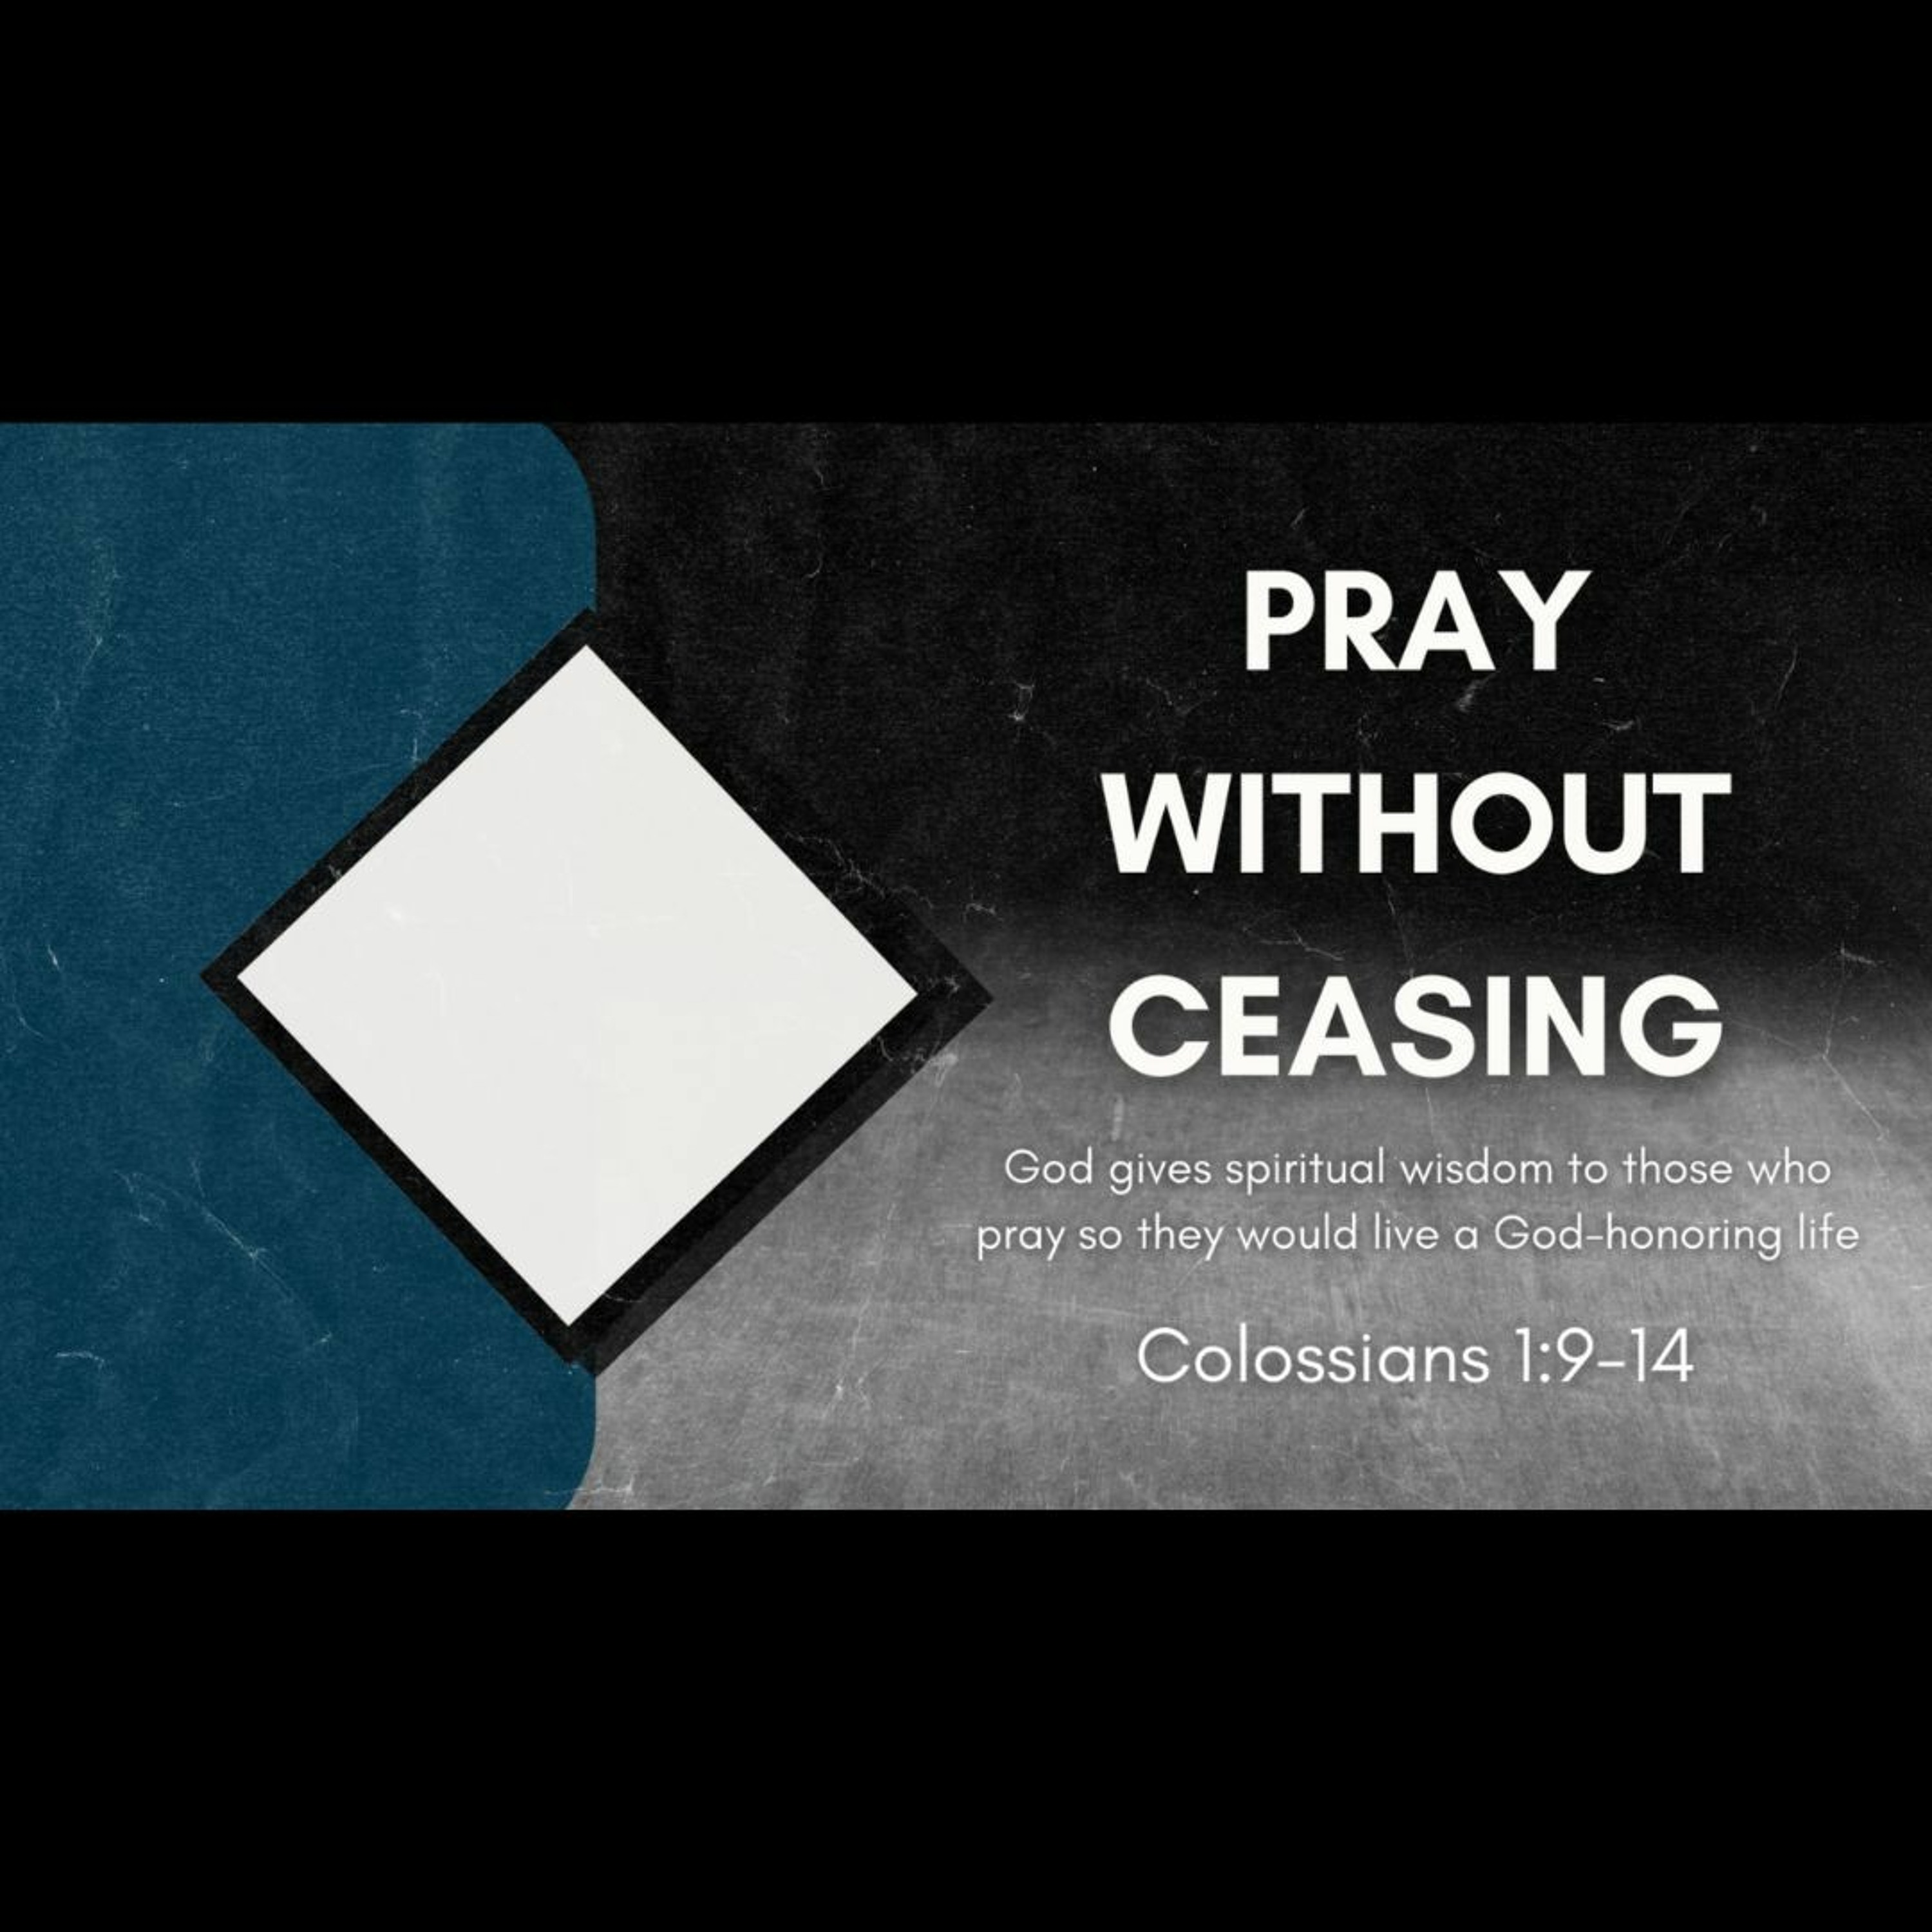 Pray Without Ceasing (Colossians 1:9-14)